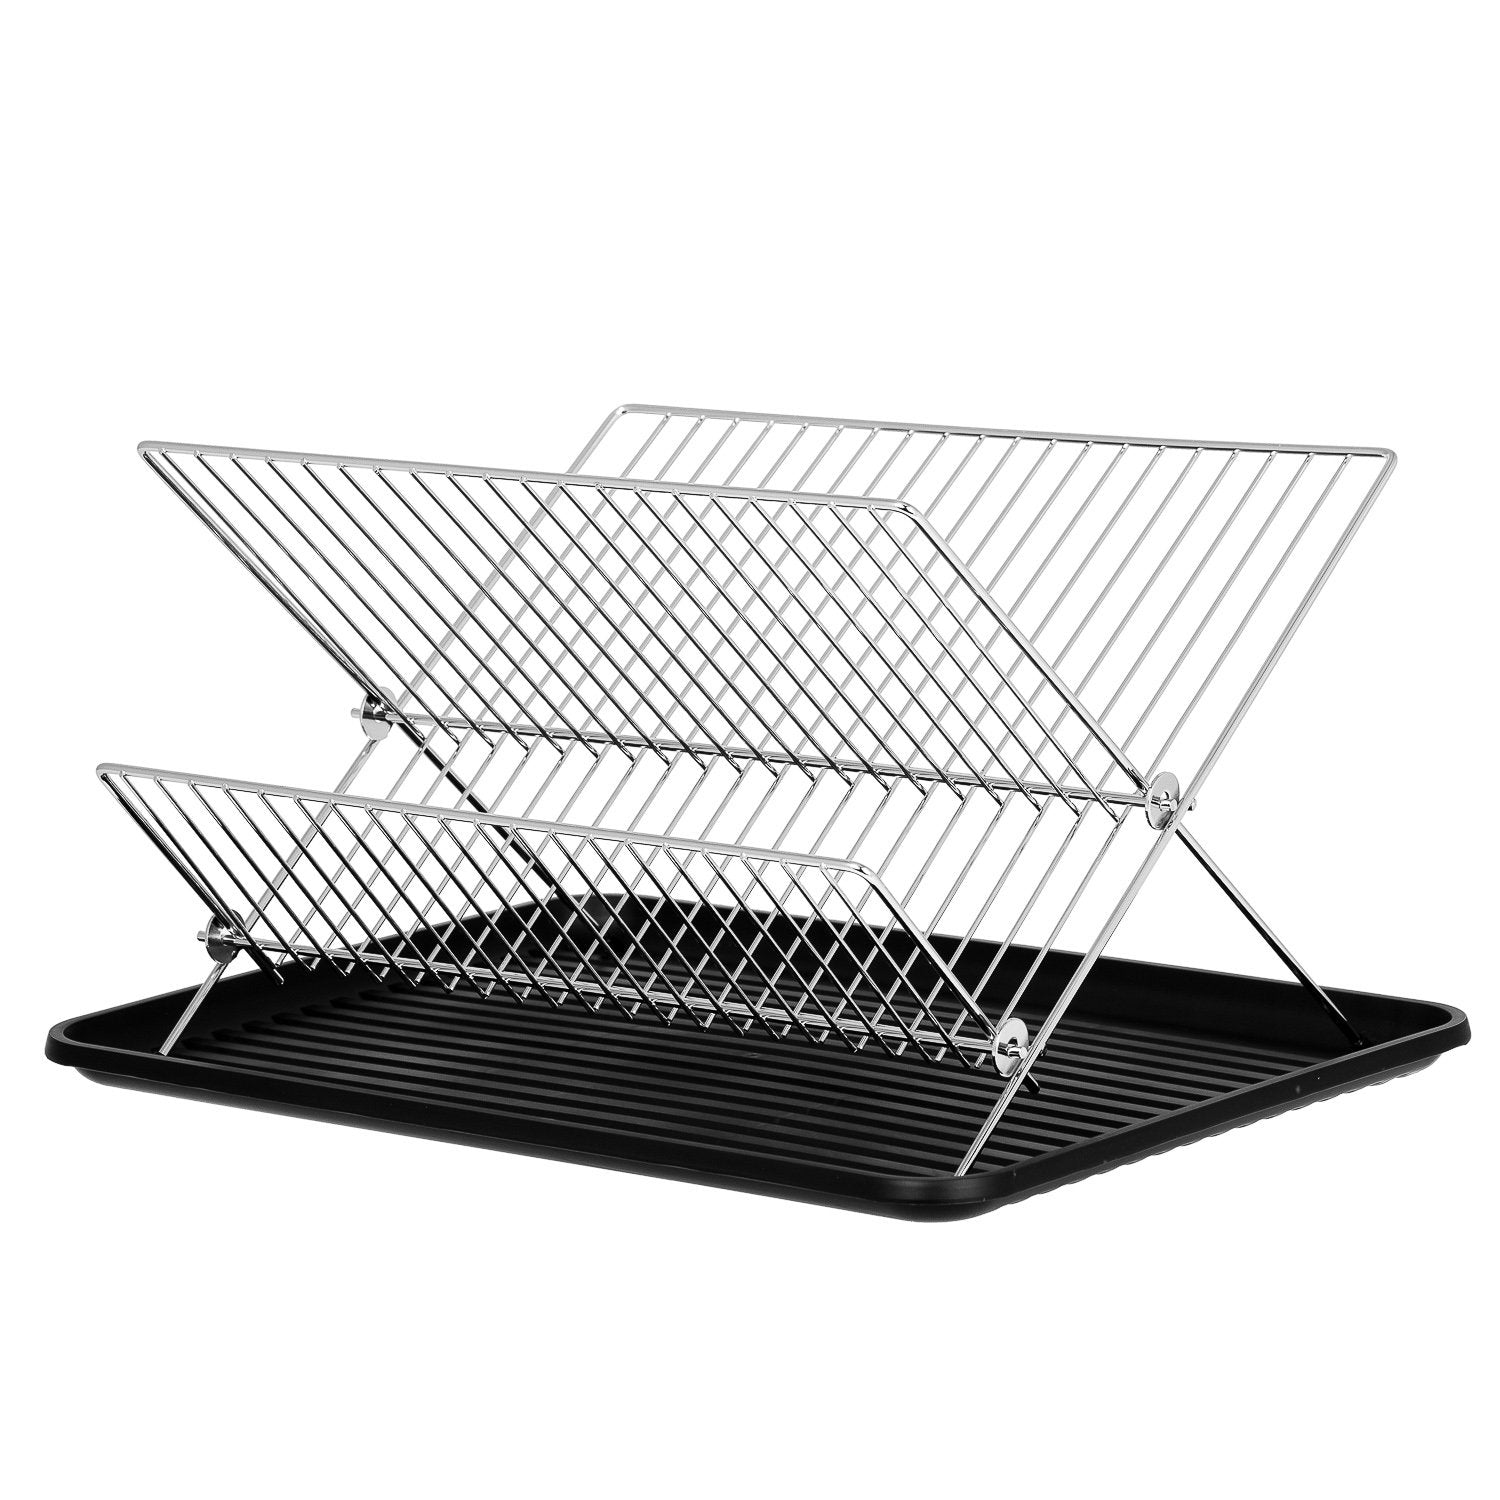 Dish Drying Rack – X Dish Drying Rack - Two Tier Dish Rack and Drainboard Set, Stainless Steel Dry Rack for Dishes with Drip Tray